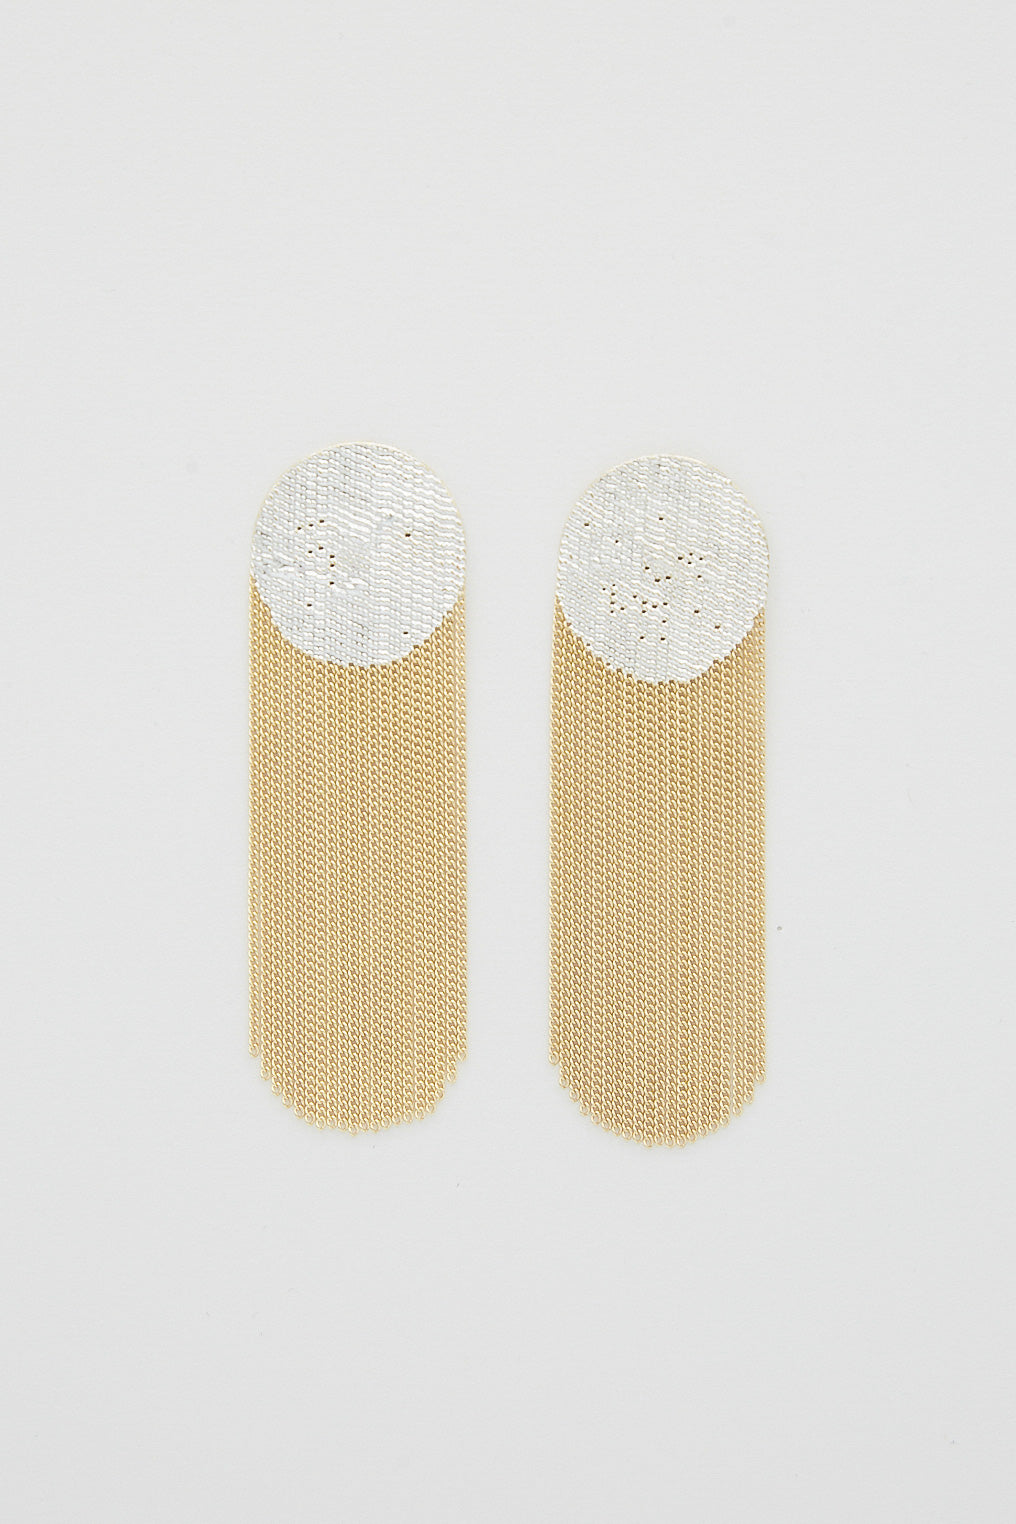 A pair of Dot Earrings in Brass Chain and Silver Solder by Hannah Keefe on a white surface, handmade in California.